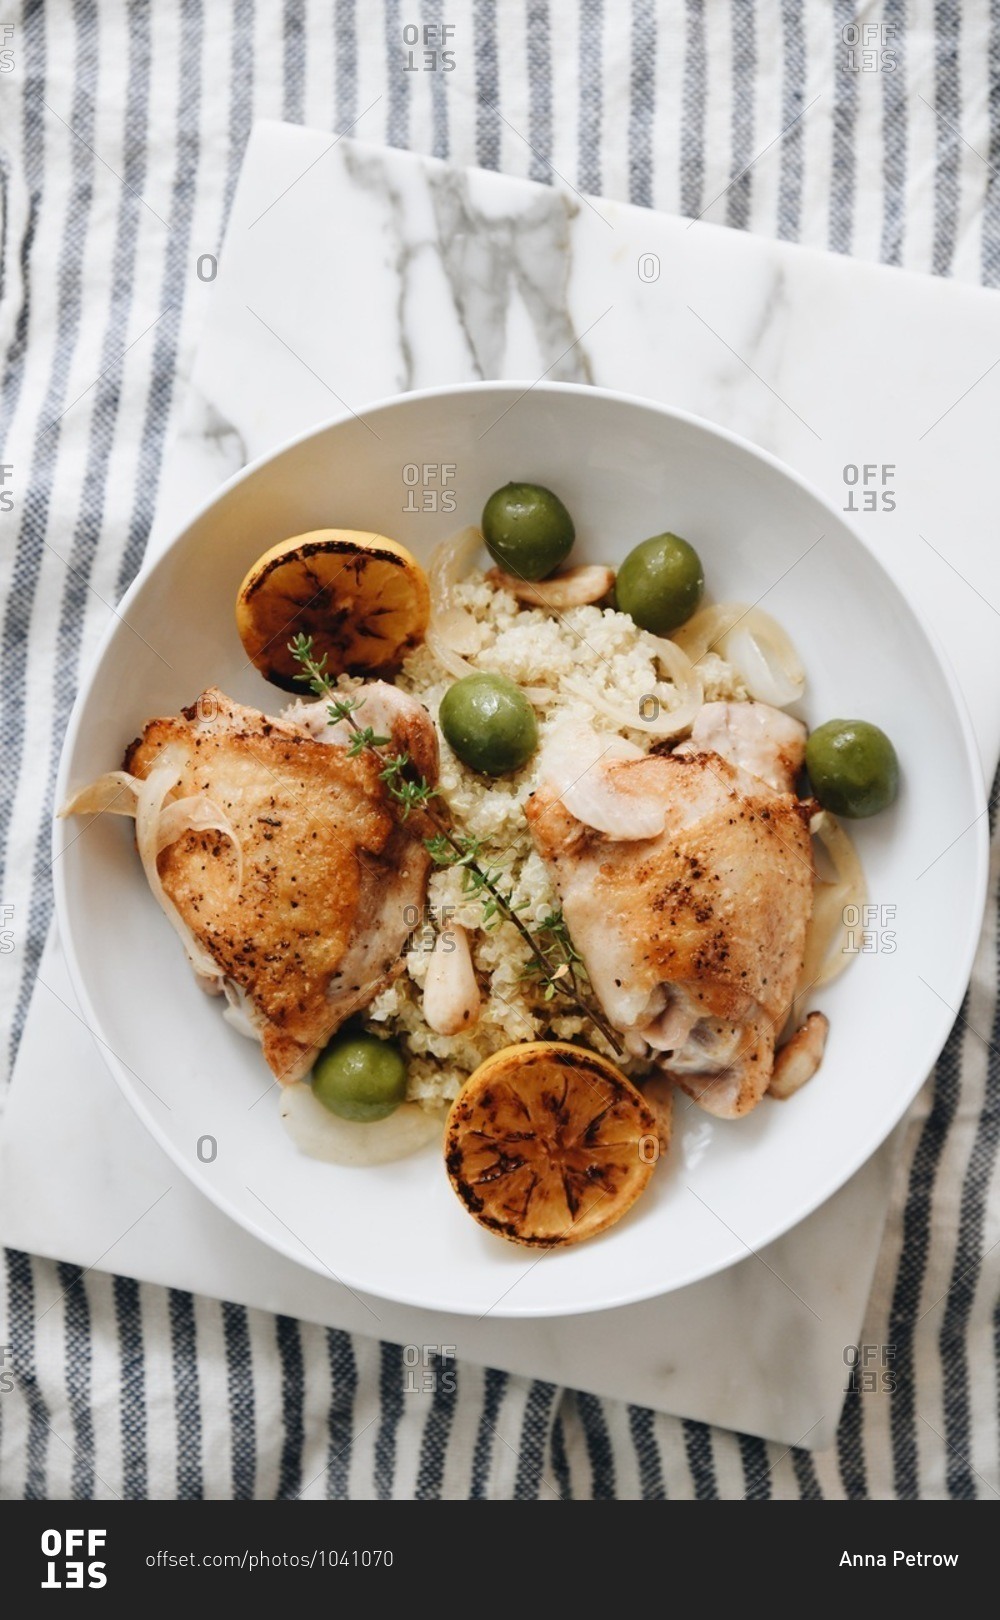 Overhead view of roasted chicken and rice in a bowl